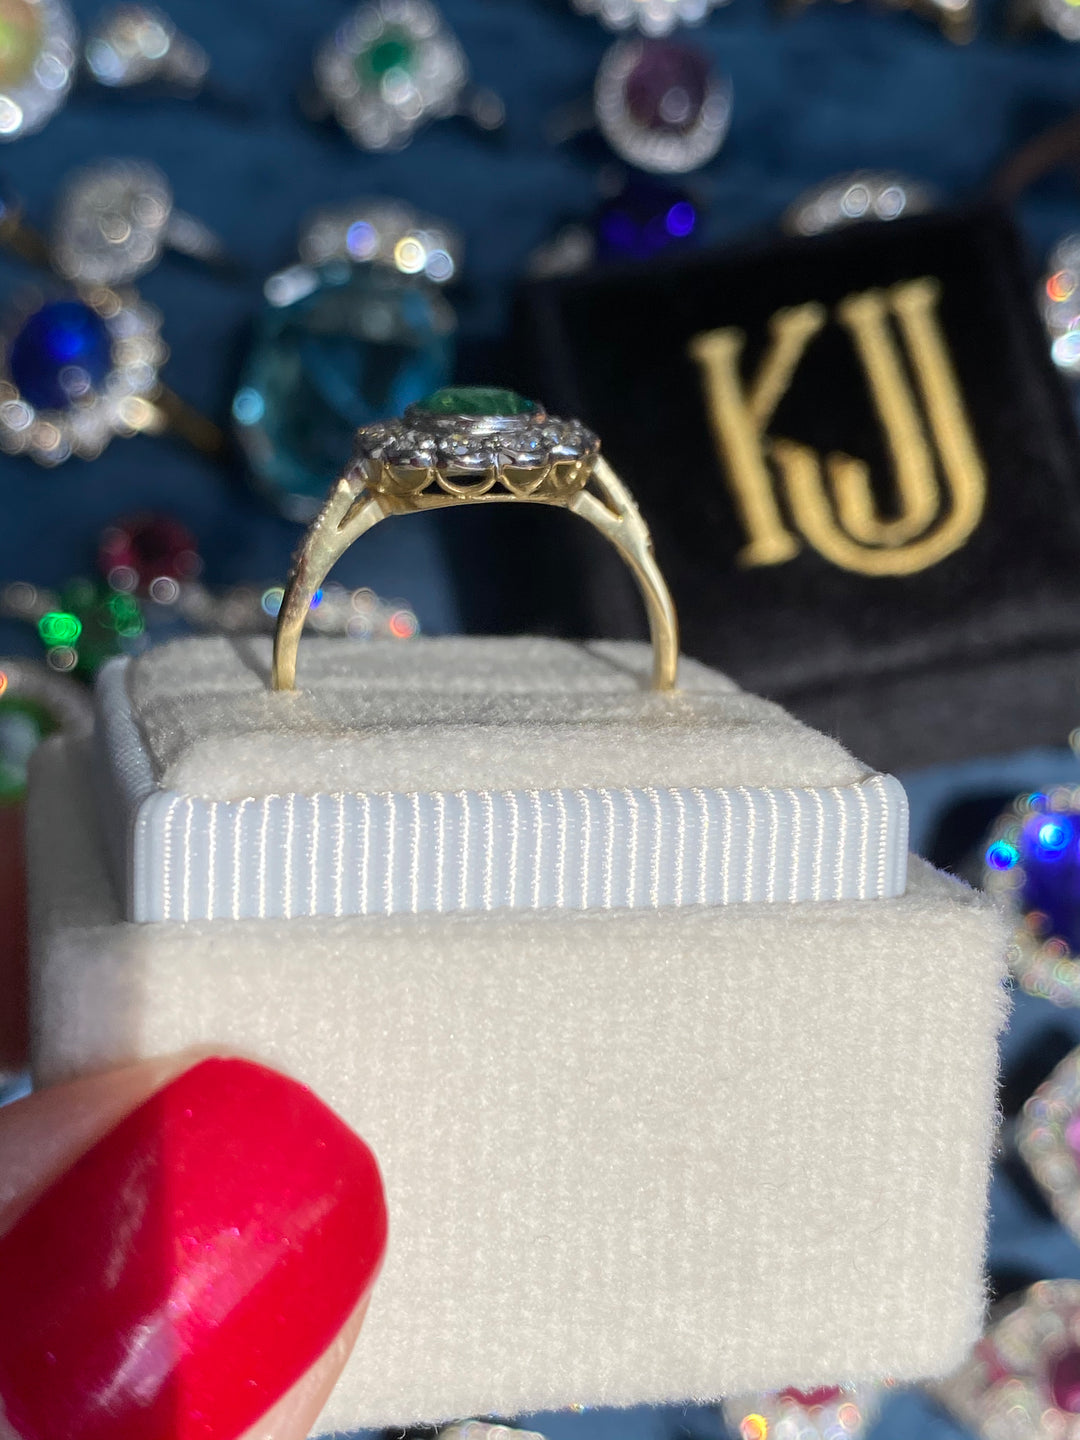 1.10 CTW Round Cut Emerald and Diamond Halo Engagement Ring in 18ct Gold